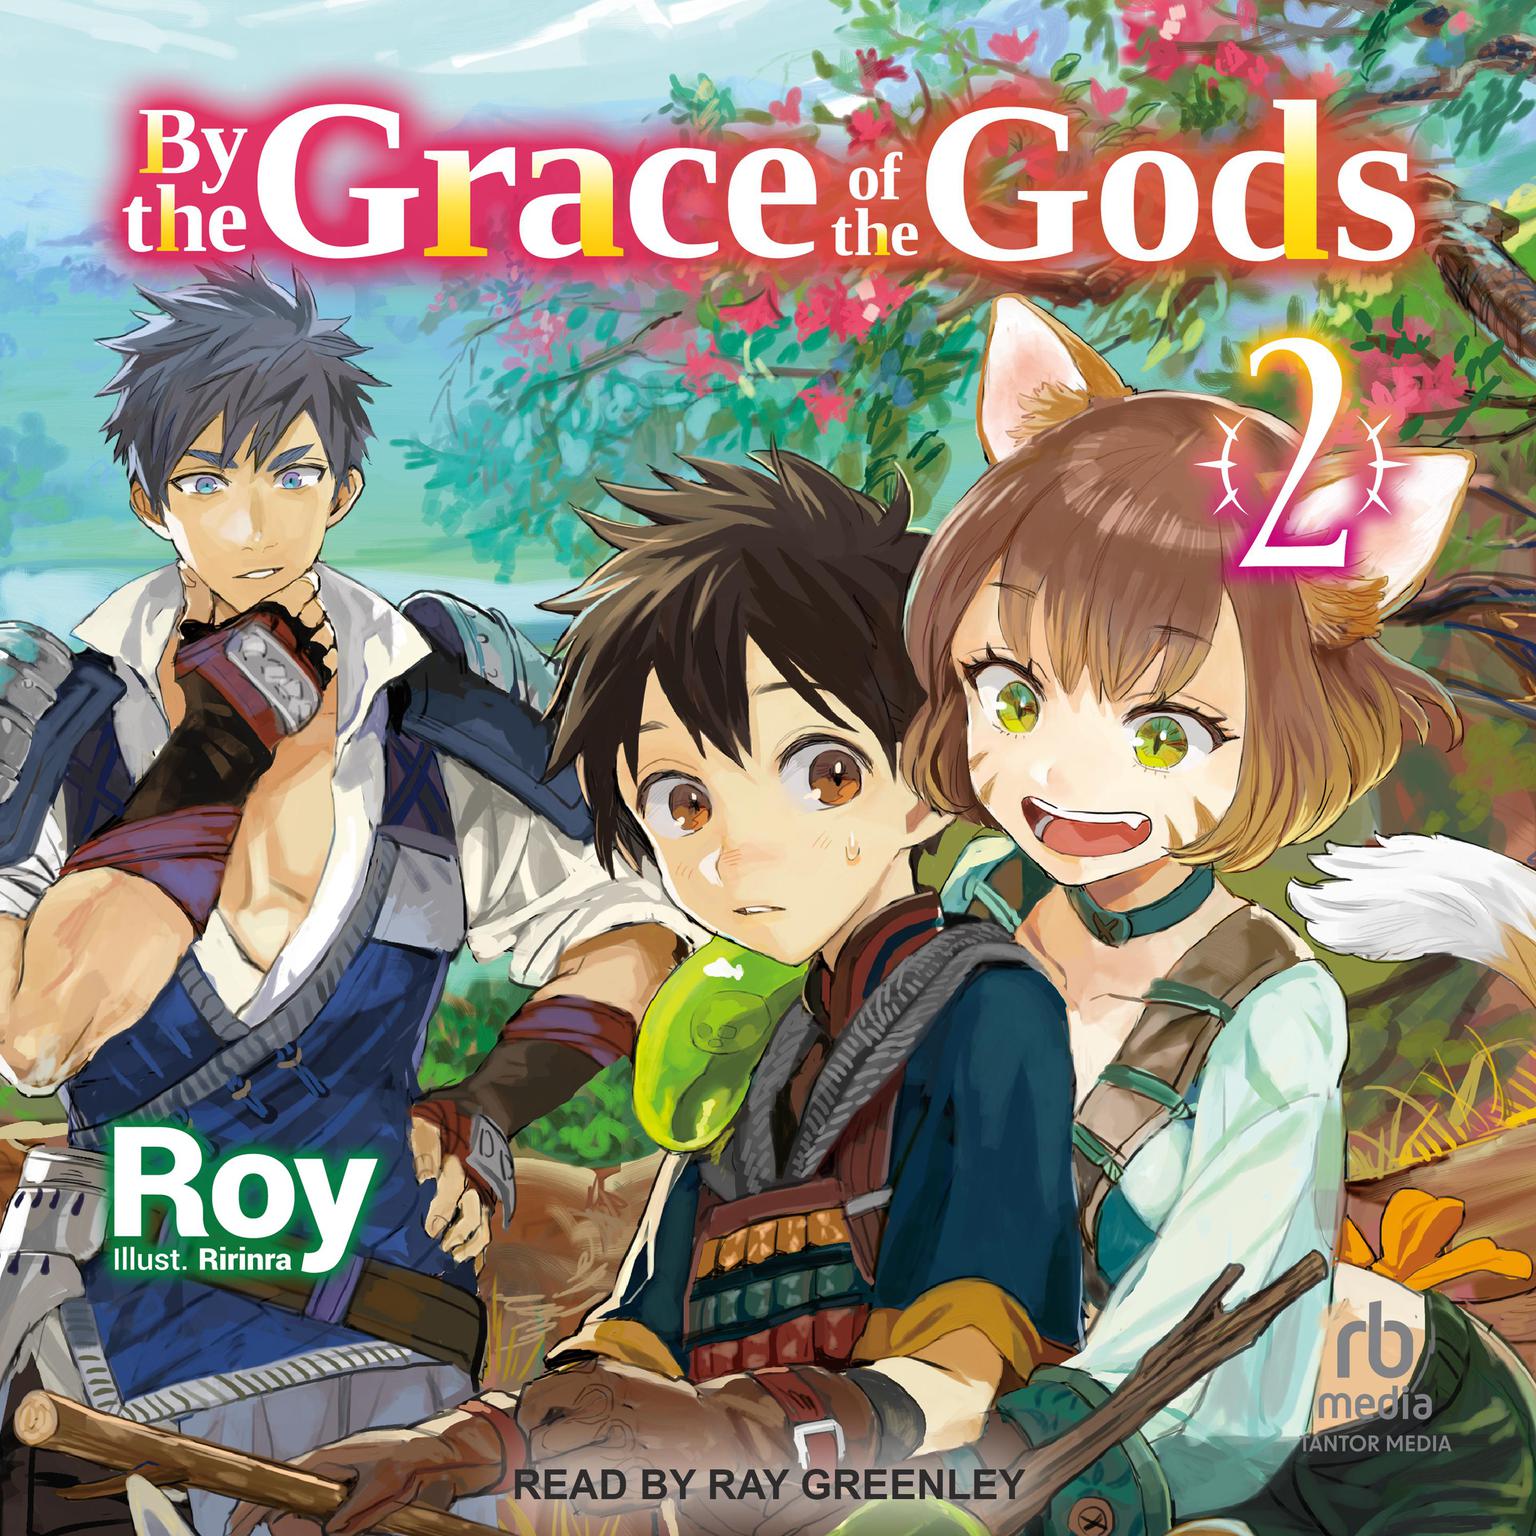 By the Grace of the Gods: Volume 2 Audiobook, by Roy 